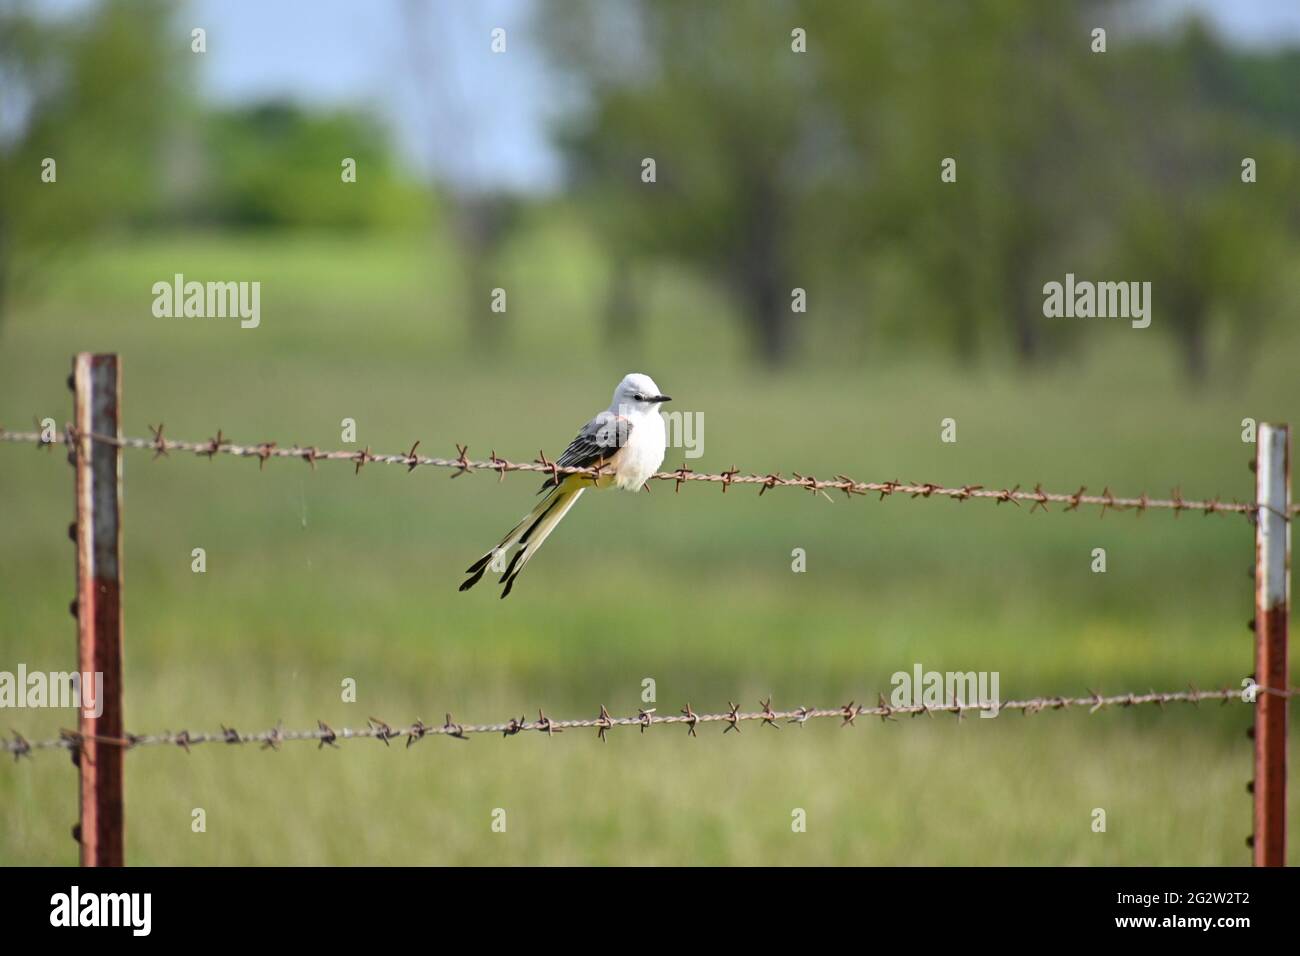 Scissor-tail flycatcher on barbed wire fence Stock Photo